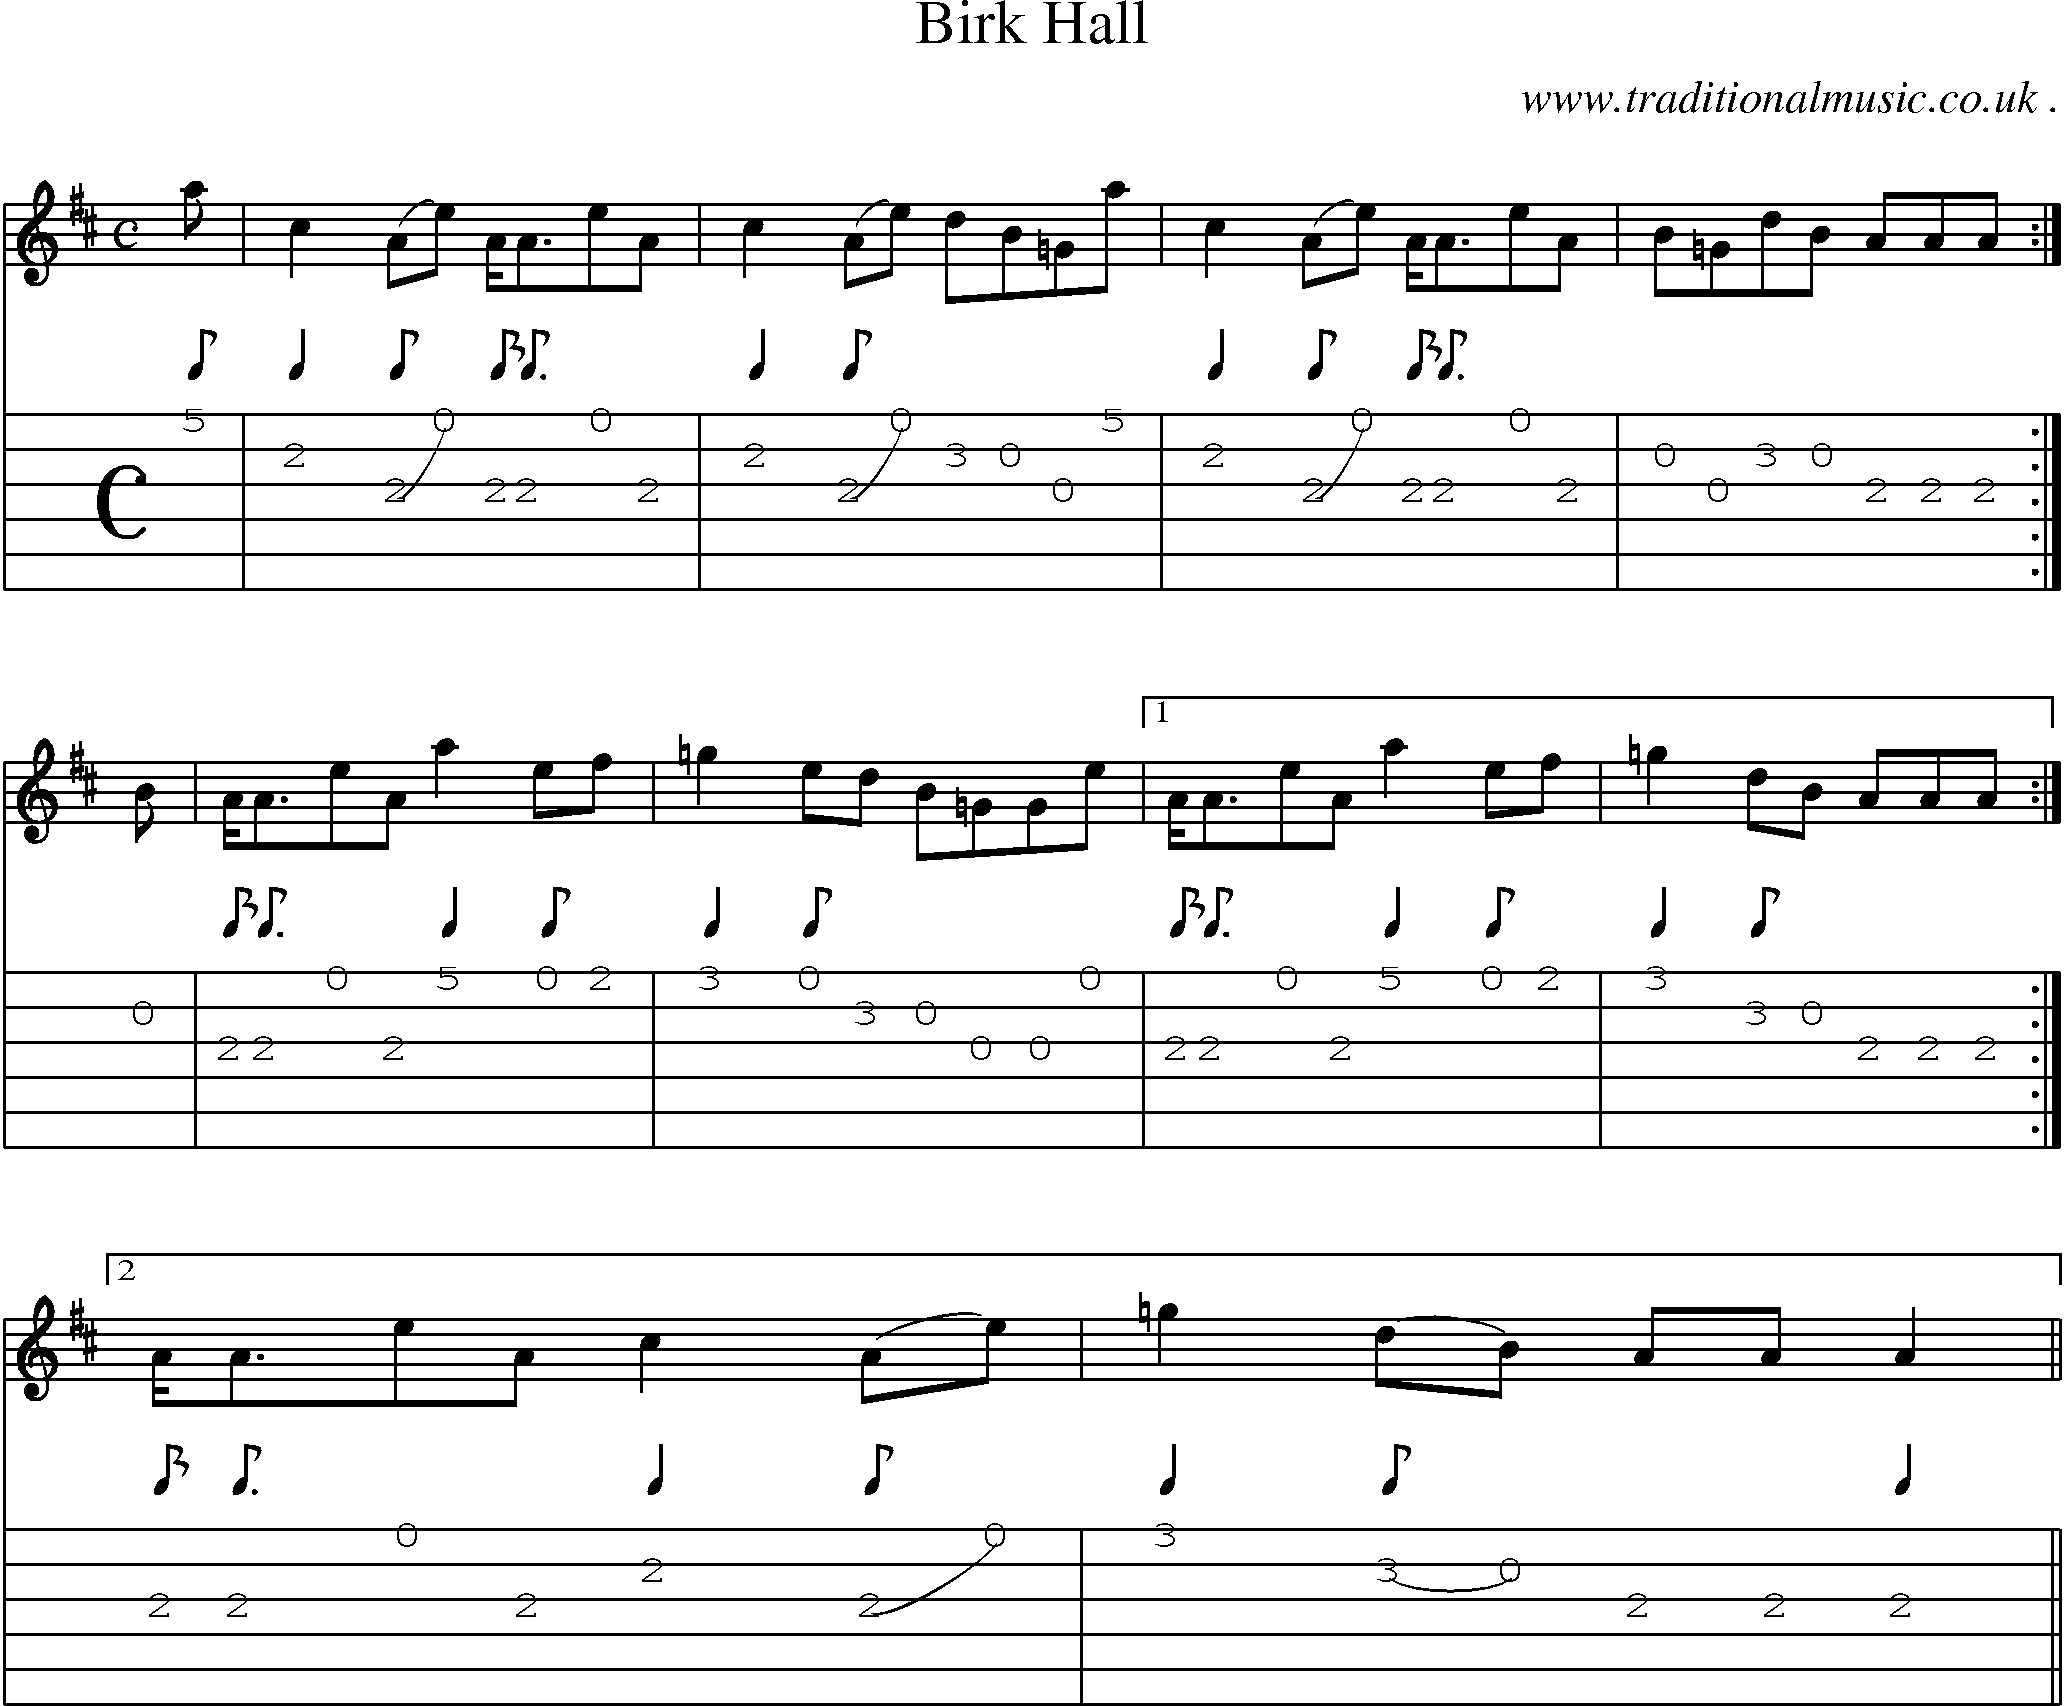 Sheet-music  score, Chords and Guitar Tabs for Birk Hall